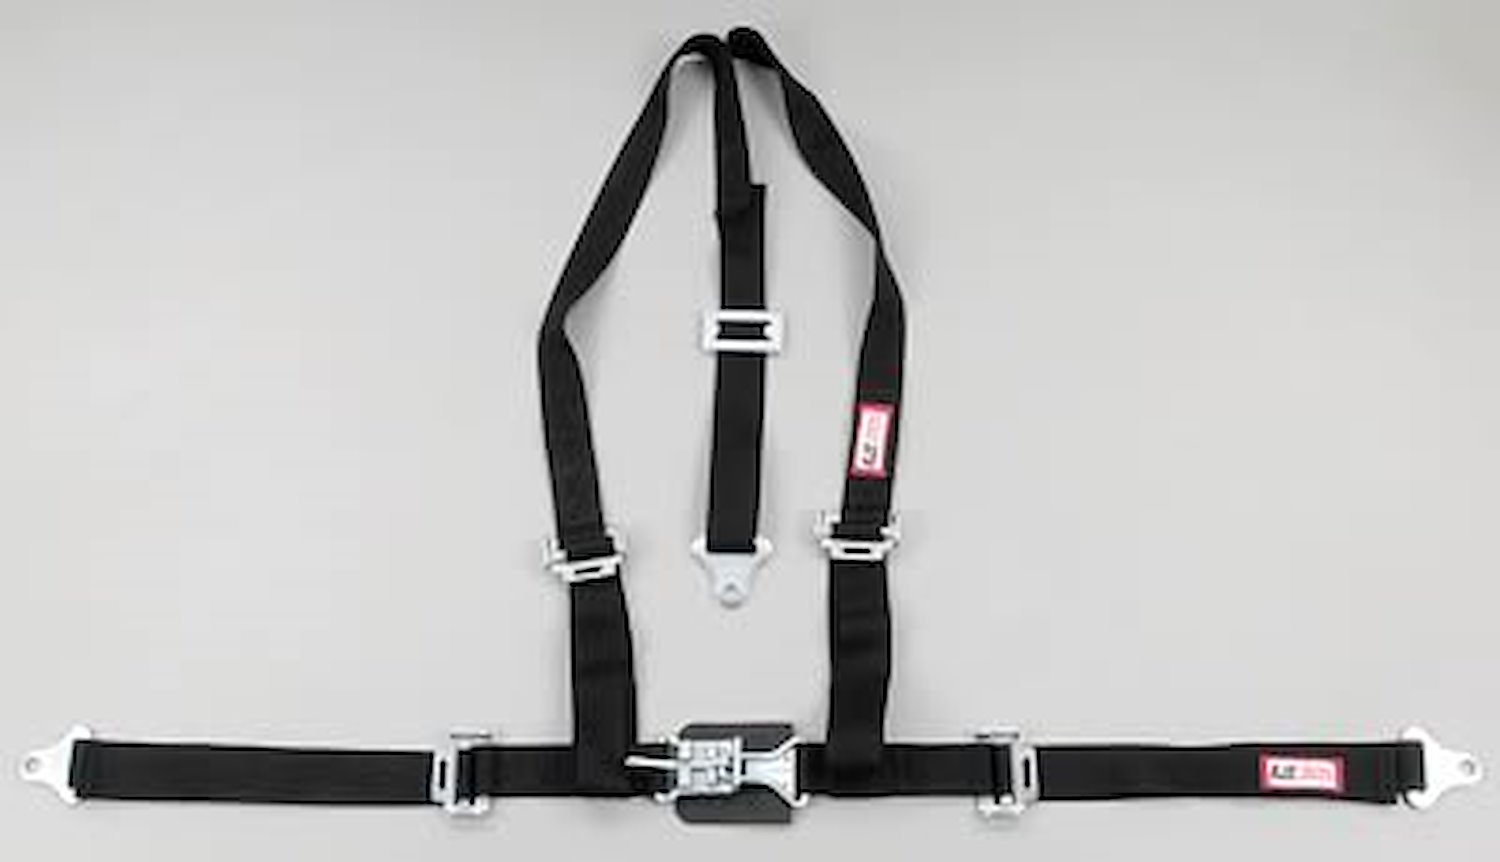 NON-SFI L&L HARNESS 3 PULL DOWN Lap Belt SEWN IN 2 Shoulder Harness V ROLL BAR Mount w/STERNUM STRAP ALL BOLT ENDS RED